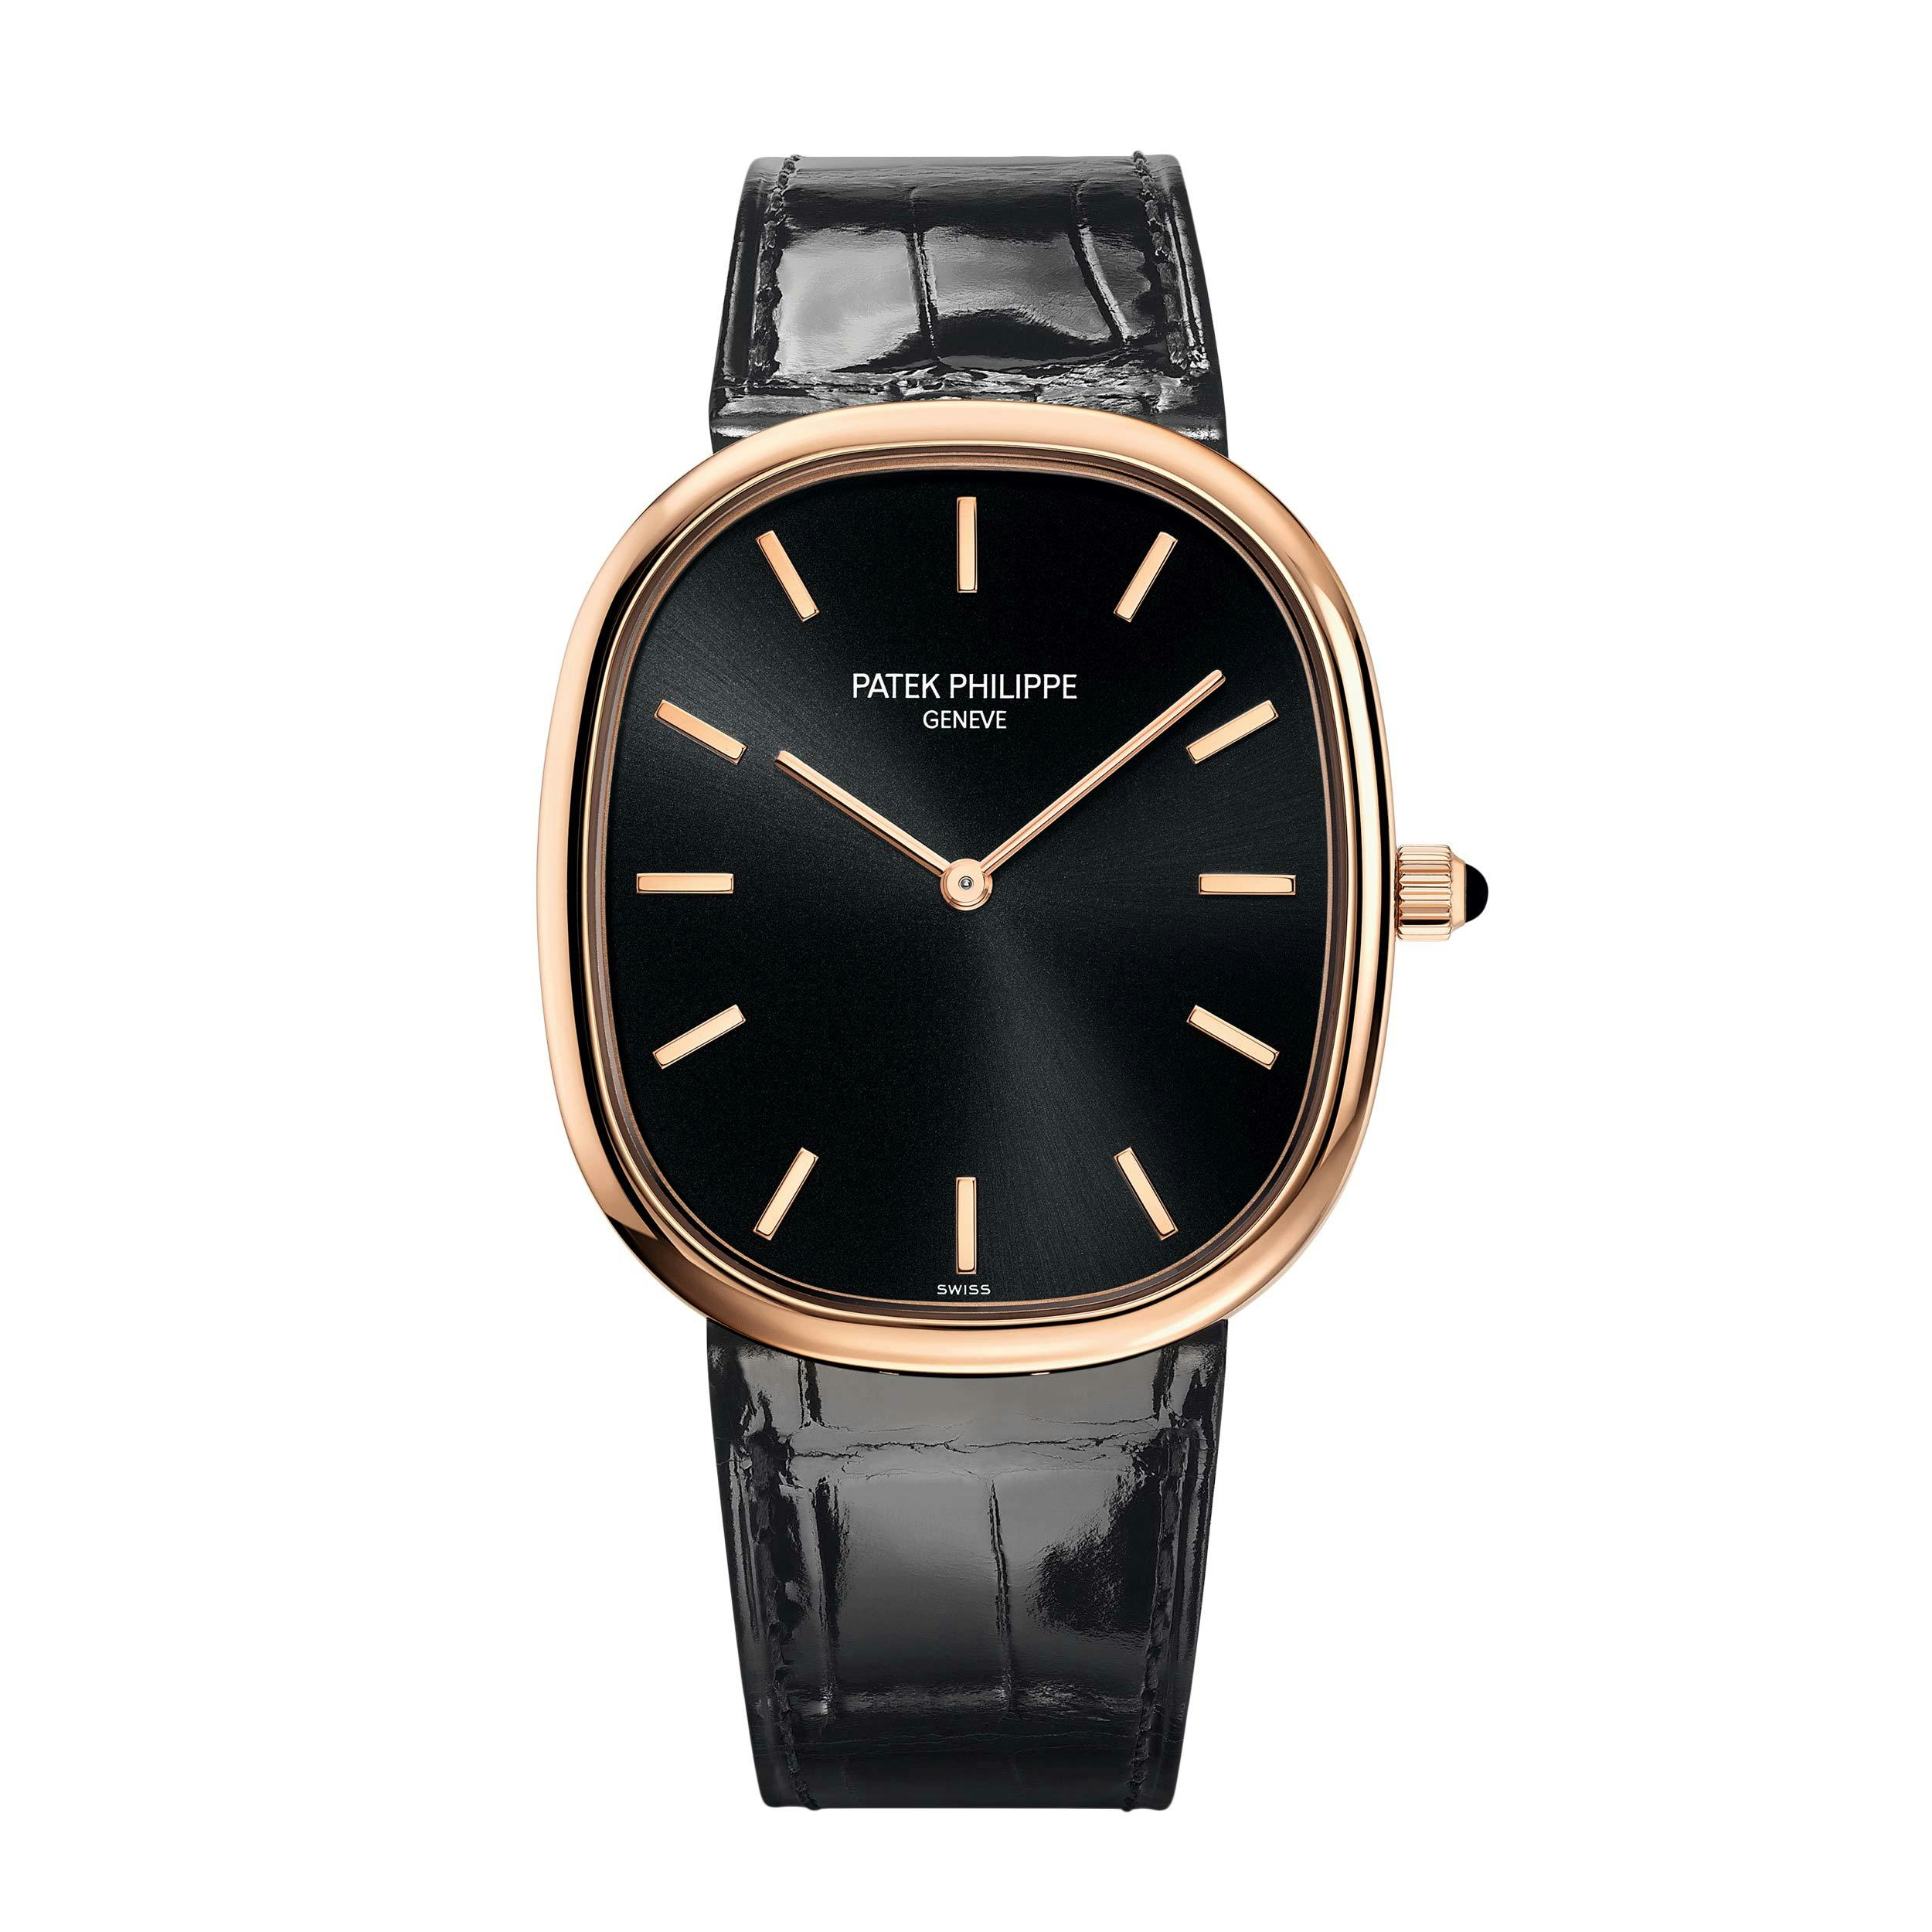 New Patek Philippe Golden Ellipse Watches | The 1916 Company